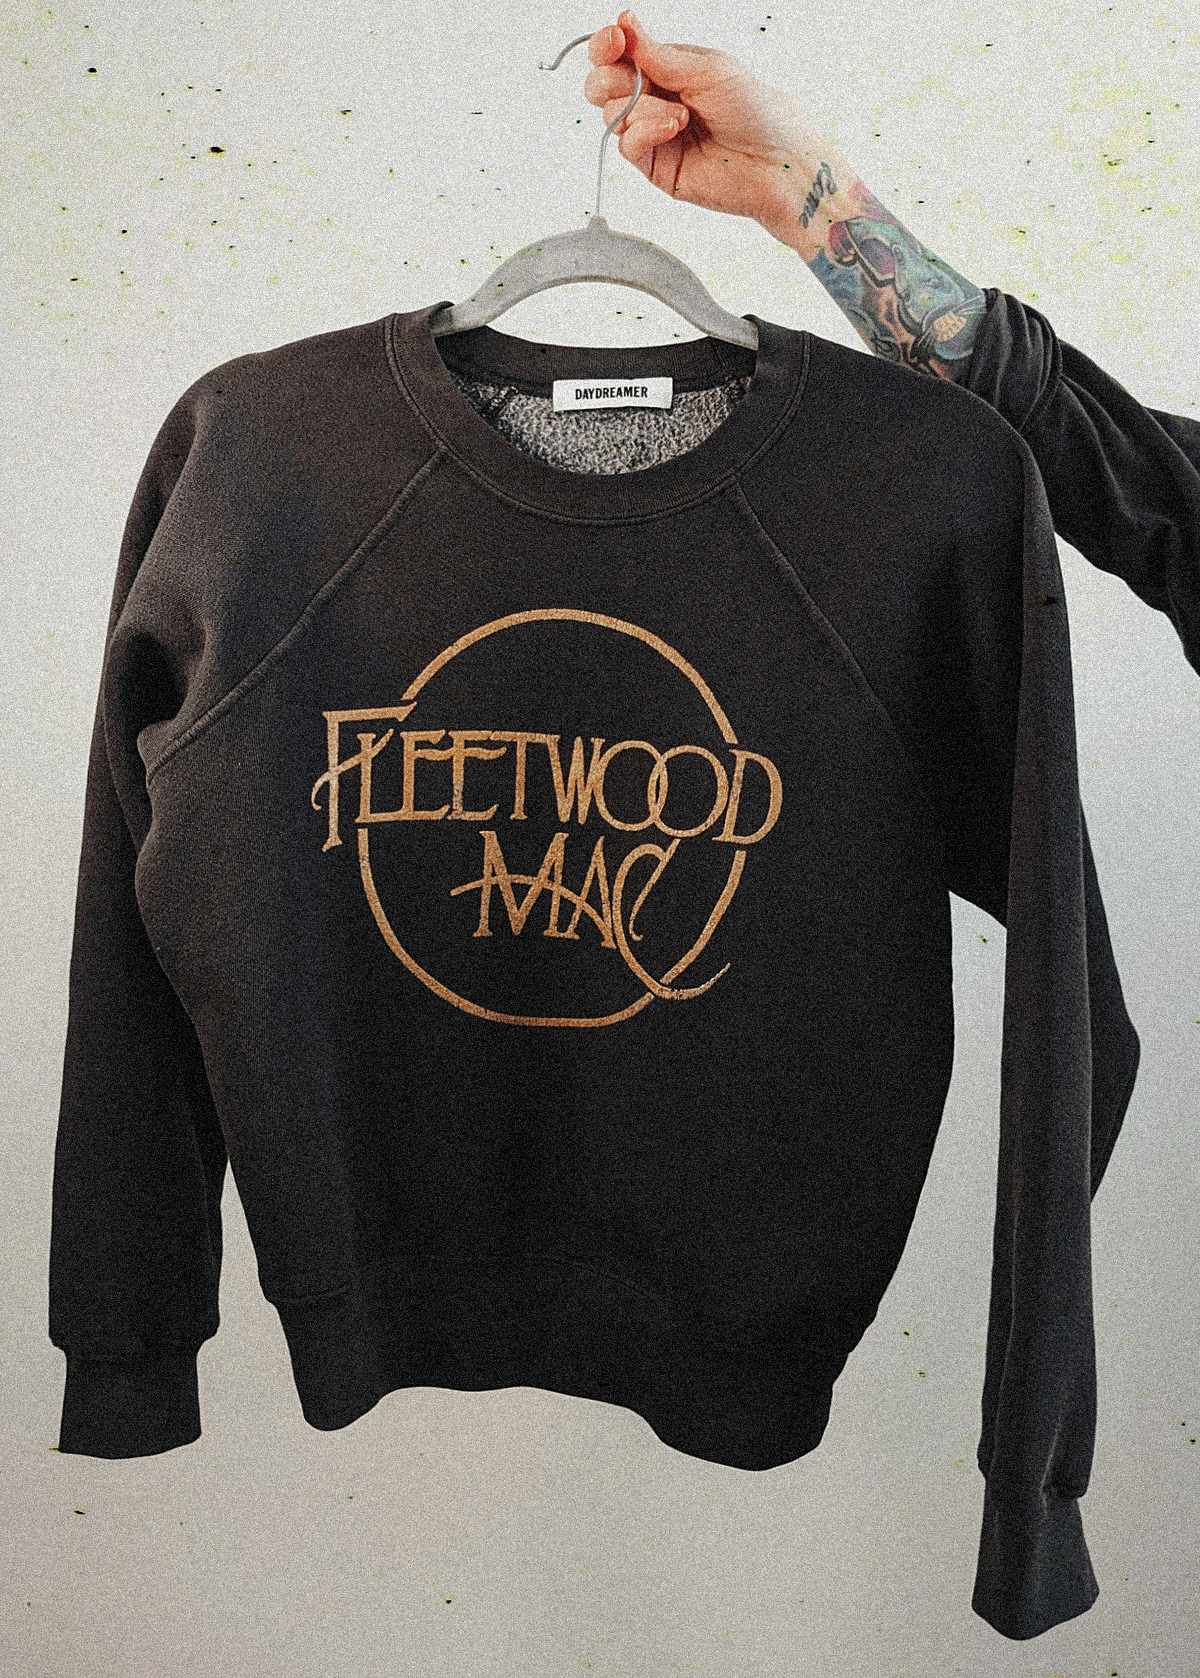 Washed Black Fleetwood Mac raglan crew neck sweatshirt with gold graphics at front, by Daydreamer LA, officially licensed and made in California